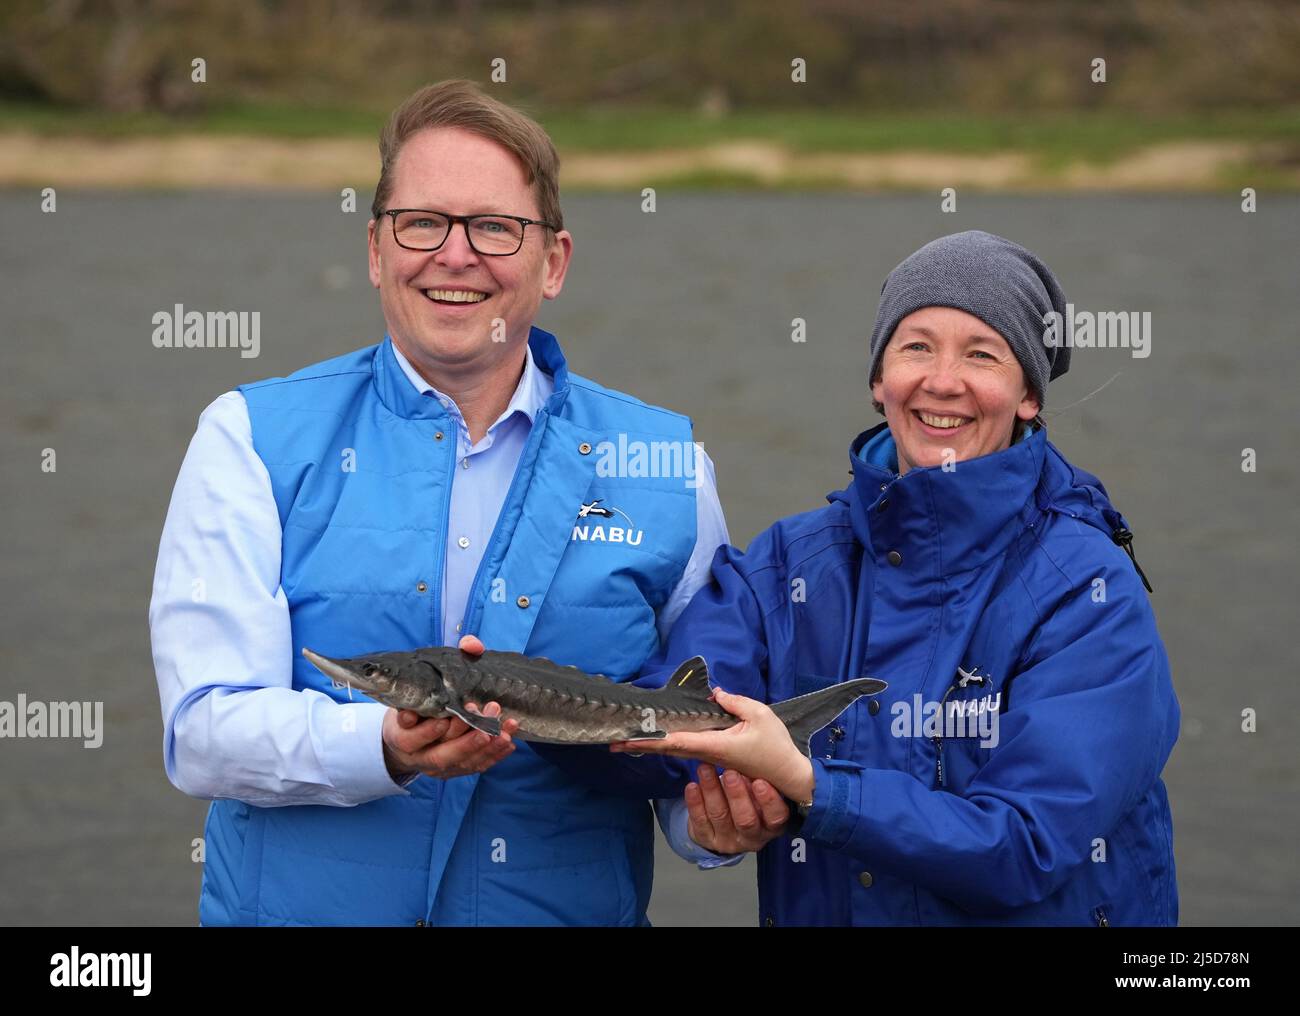 Brandenburg, Germany. 22nd Apr, 2022. 22 April 2022, Brandenburg, Angermünde/Ot Criewen: Jörg-Andreas Krüger (l), Nabu President, and Aija Torkler, Head of the Nabu Adventure Center Blumberger Mühle, place a young sturgeon in the water of the Oder River in the Lower Oder Valley National Park near the Stützkow lookout tower. The Nabu Center Blumberger Mühle, together with the Leibniz Institute of Freshwater Ecology and Inland Fisheries (IGB) and the pond management Blumberger Teiche, released about 500 young Baltic sturgeon into the Oder River. Sturgeon stocking in the border river has been tak Stock Photo